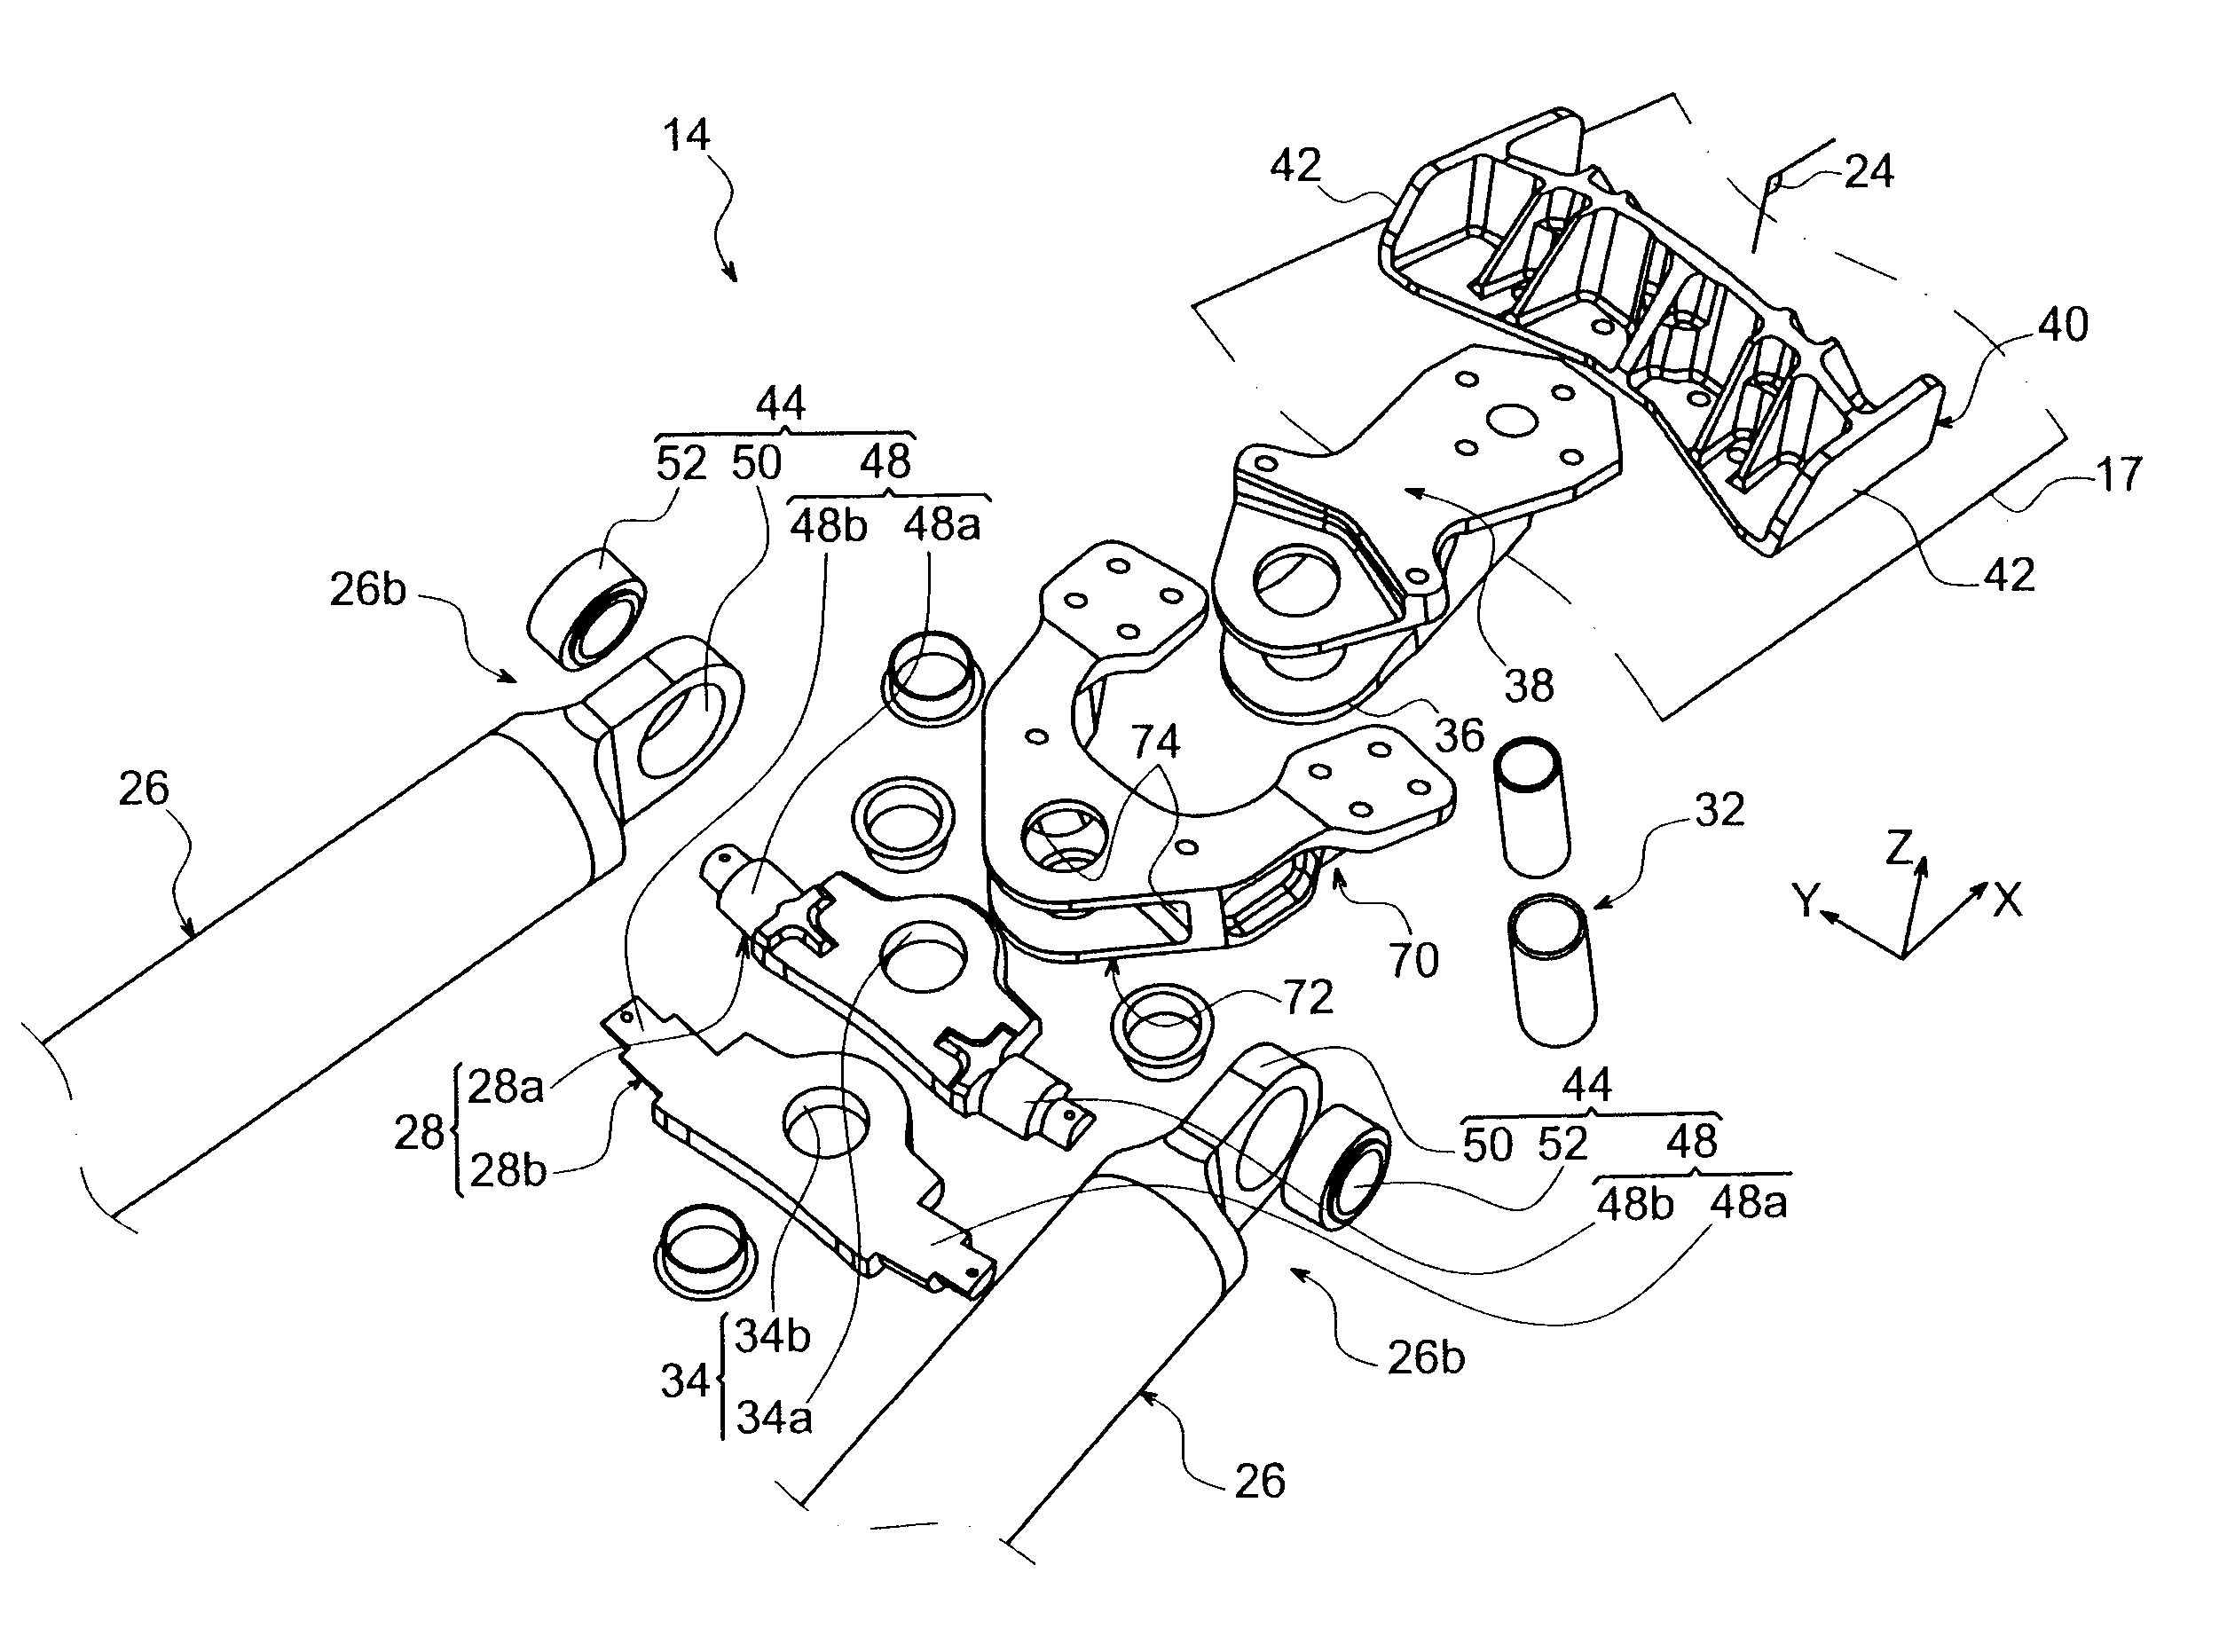 Aircraft engine mount structure comprising two thrust links with transverse fitting